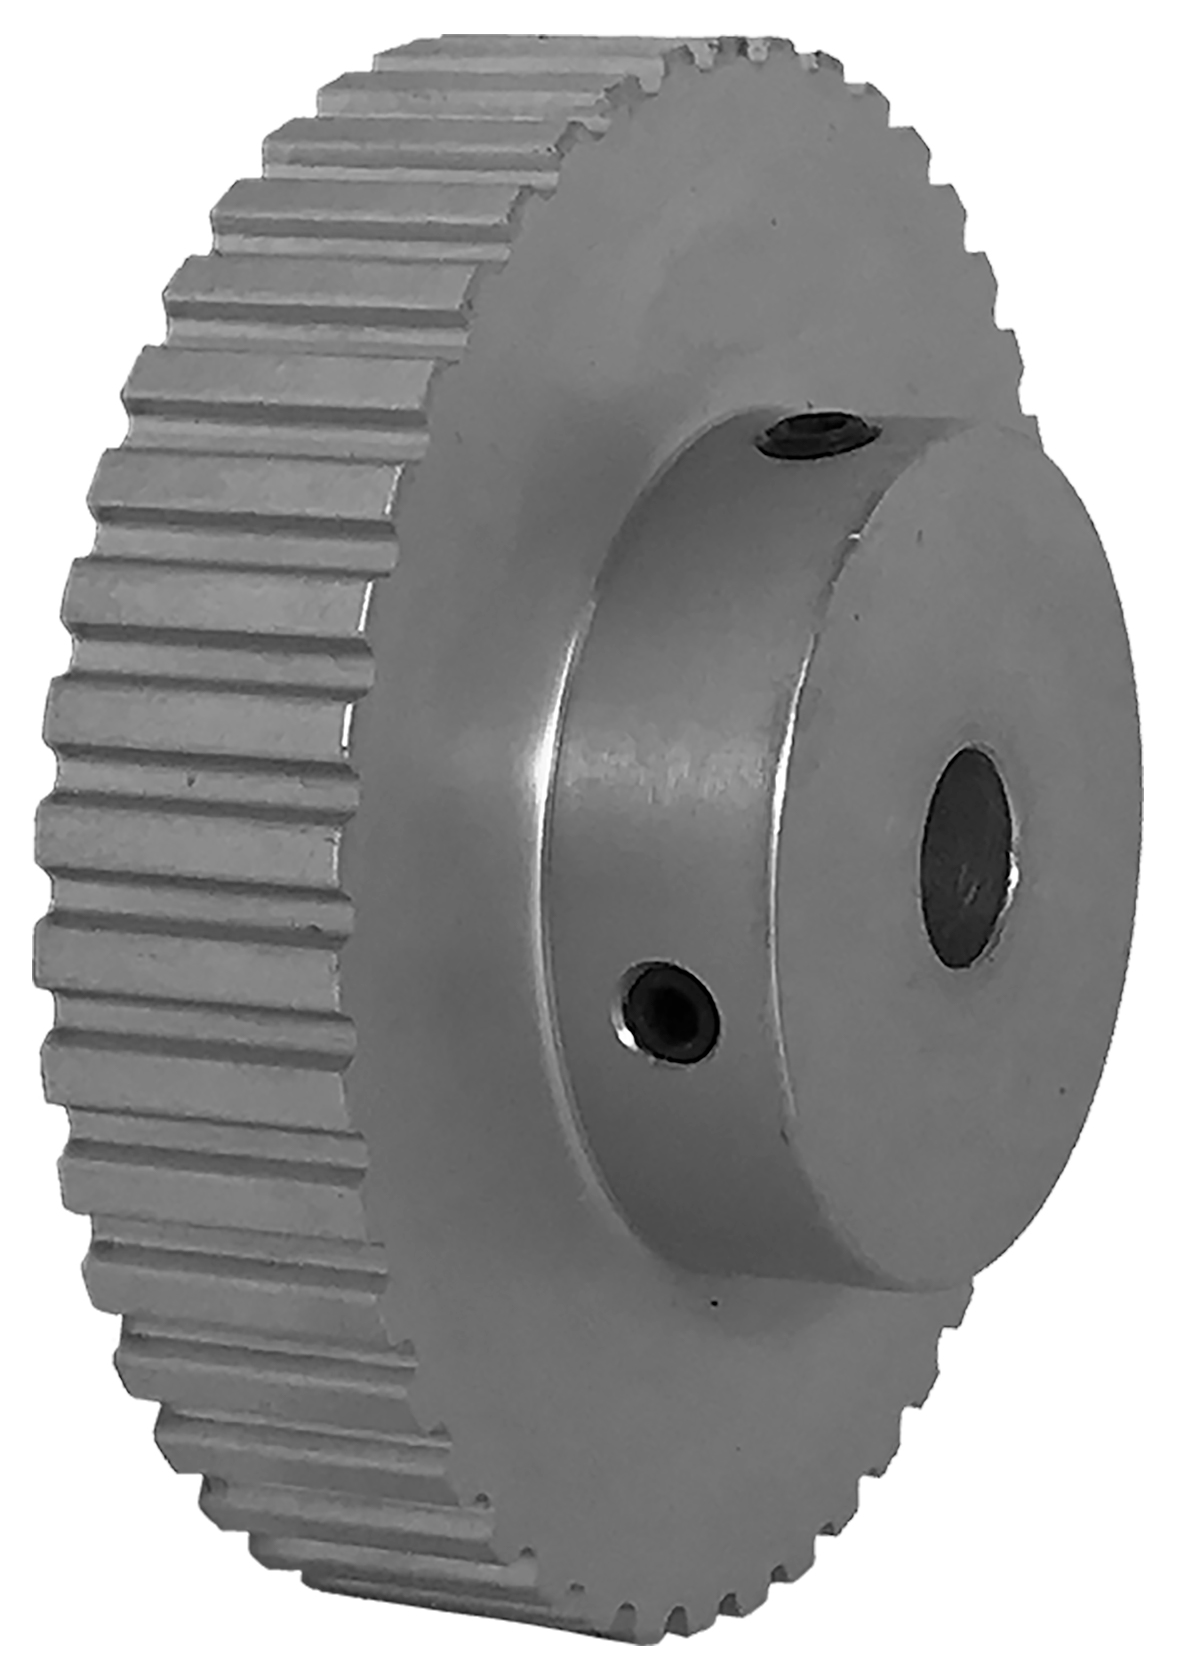 44XL037-6A5 - Aluminum Imperial Pitch Pulleys